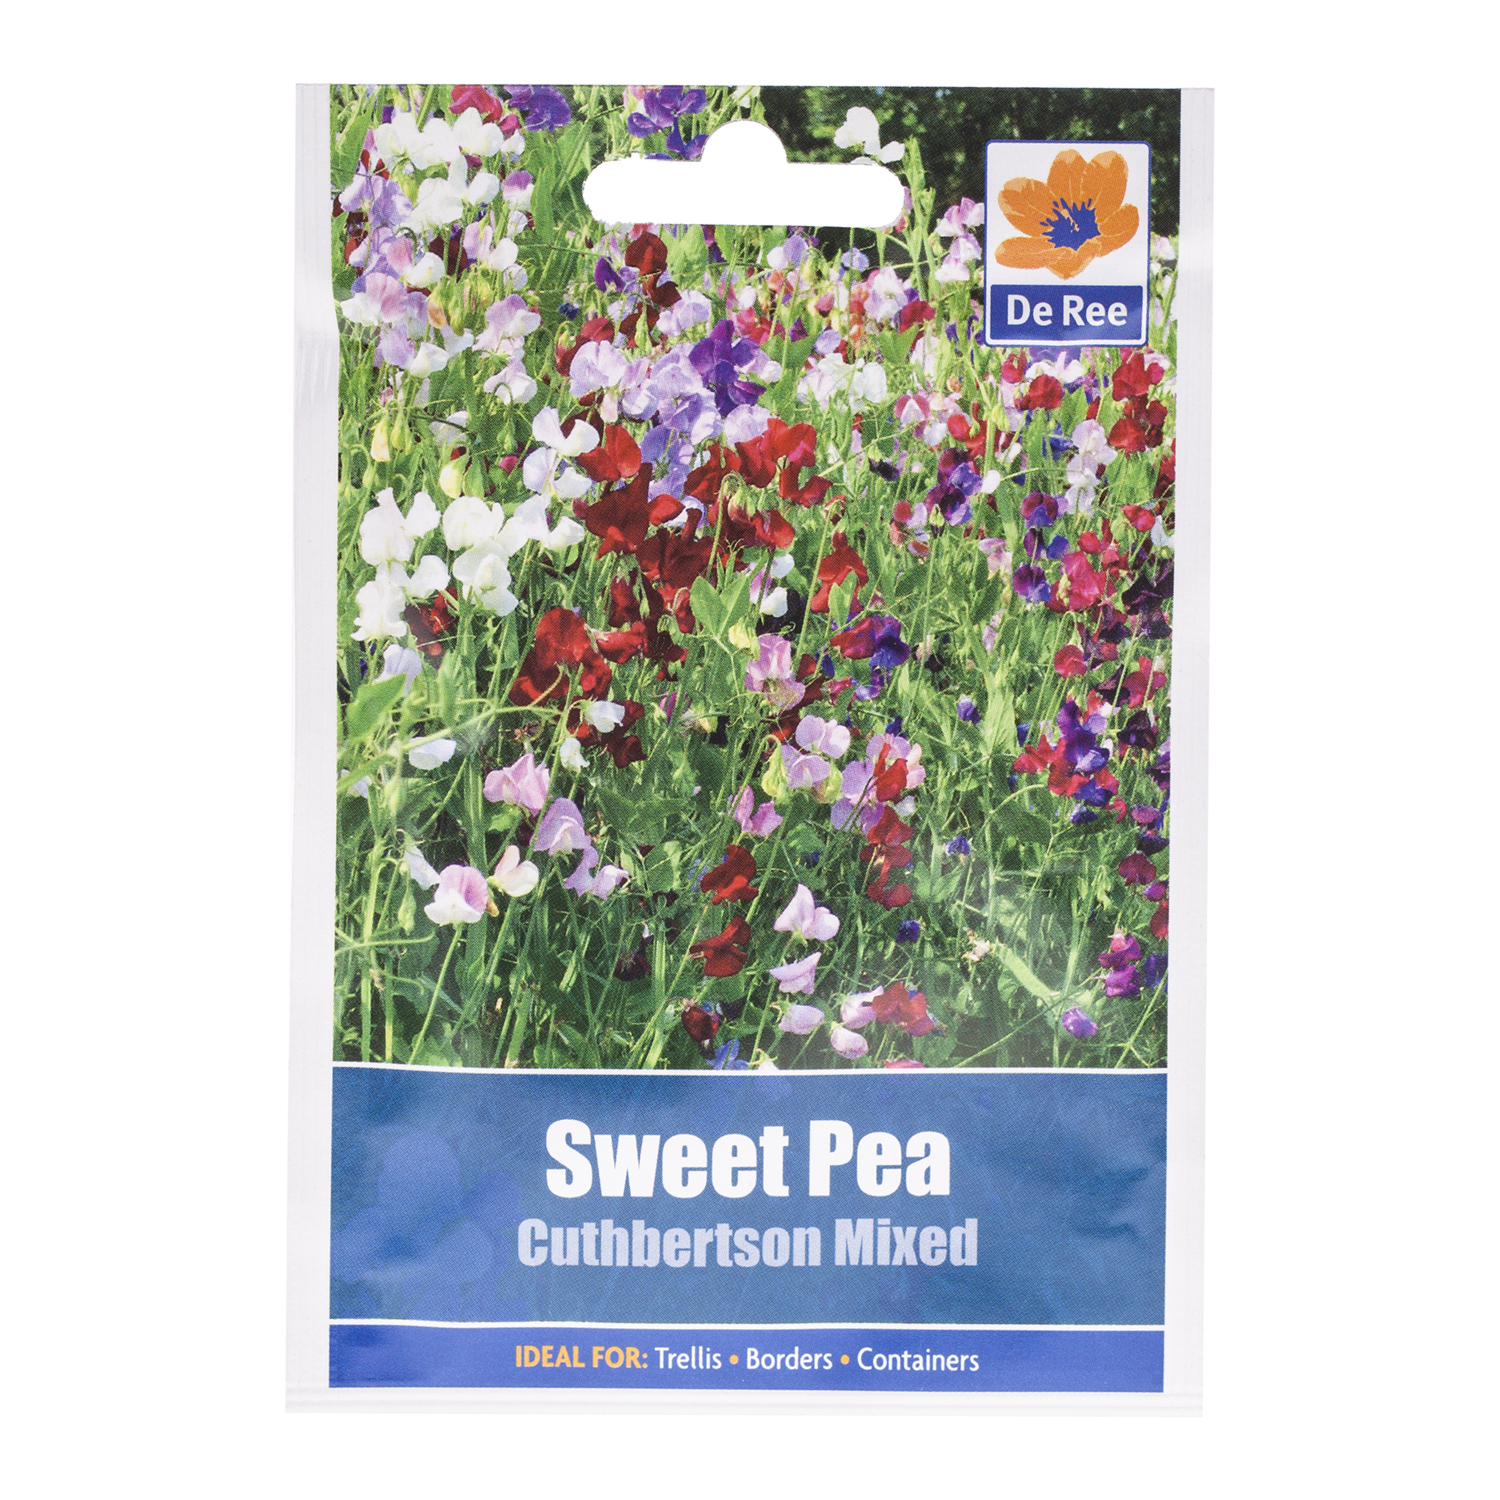 Sweet Pea Cuthbertson Seed Packet Image